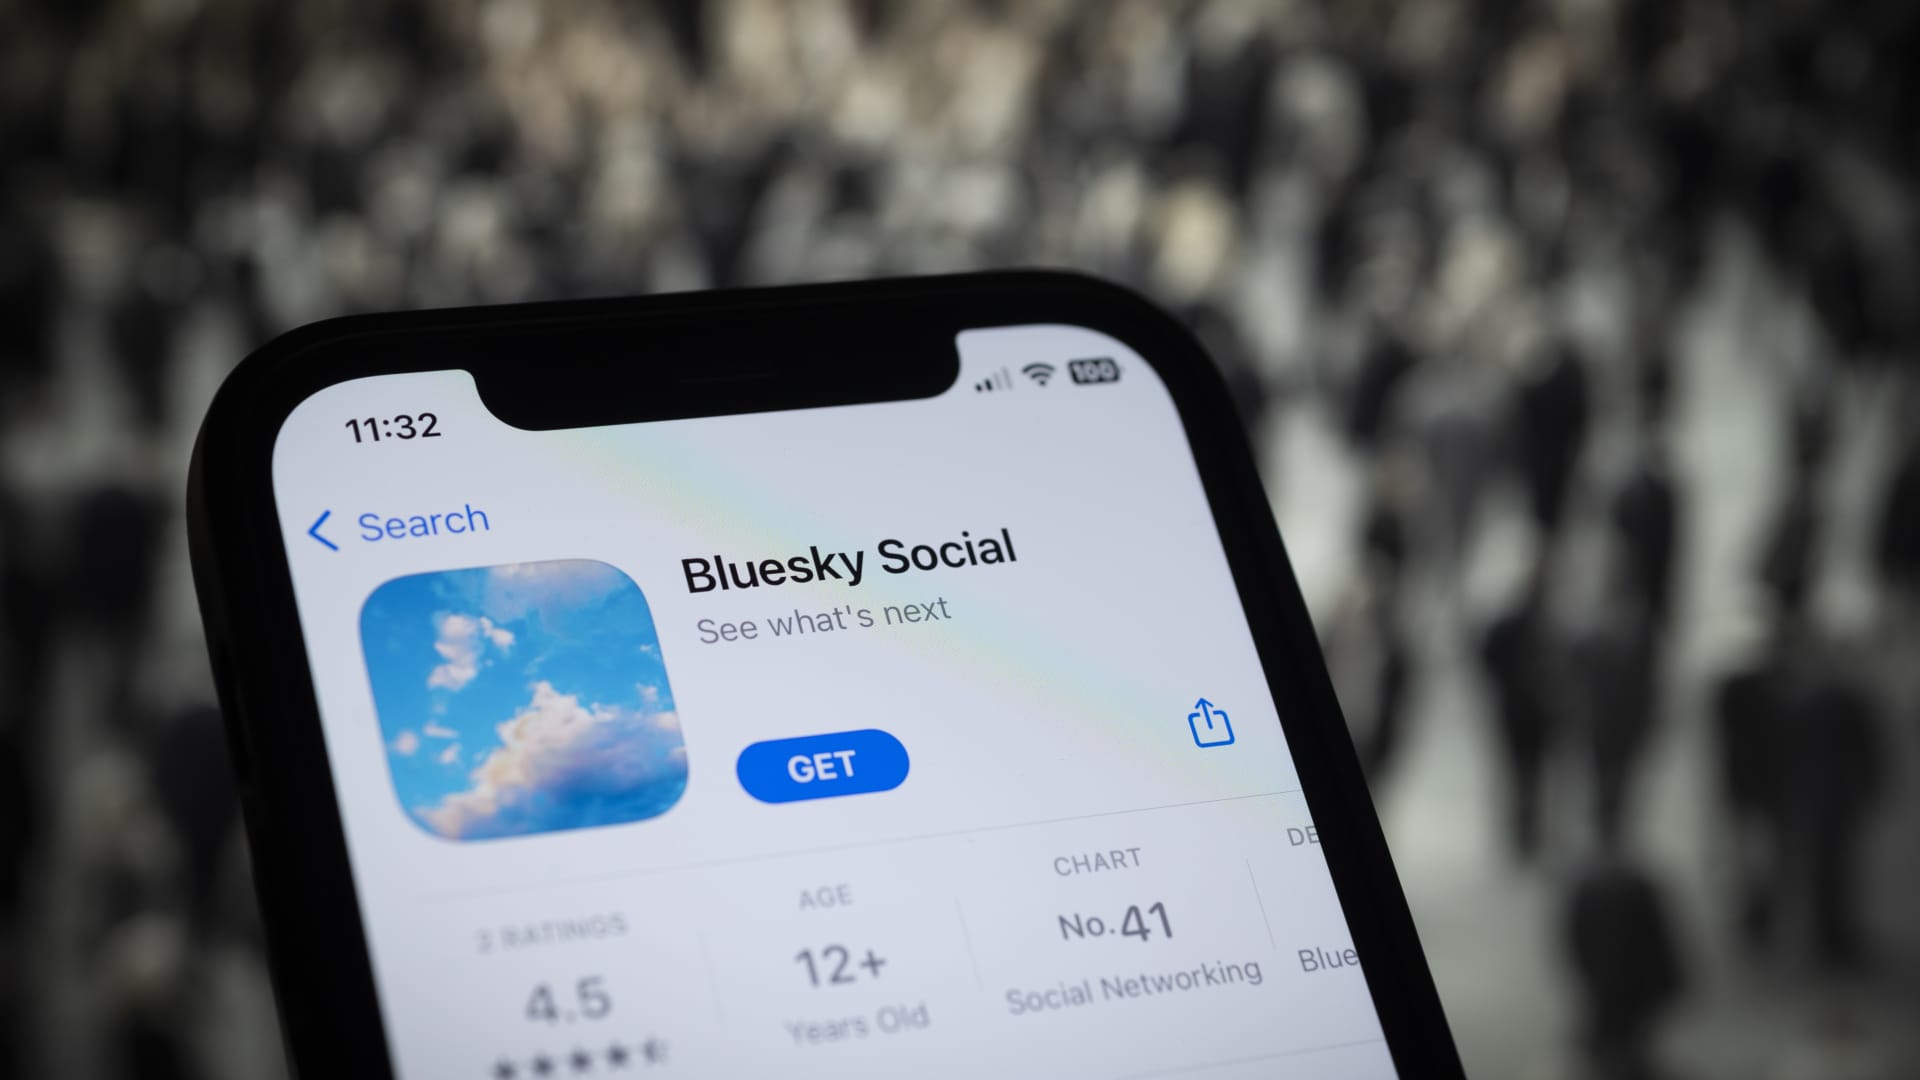 Bluesky gets 'record-high traffic' after Elon Musk's Twitter rate limits